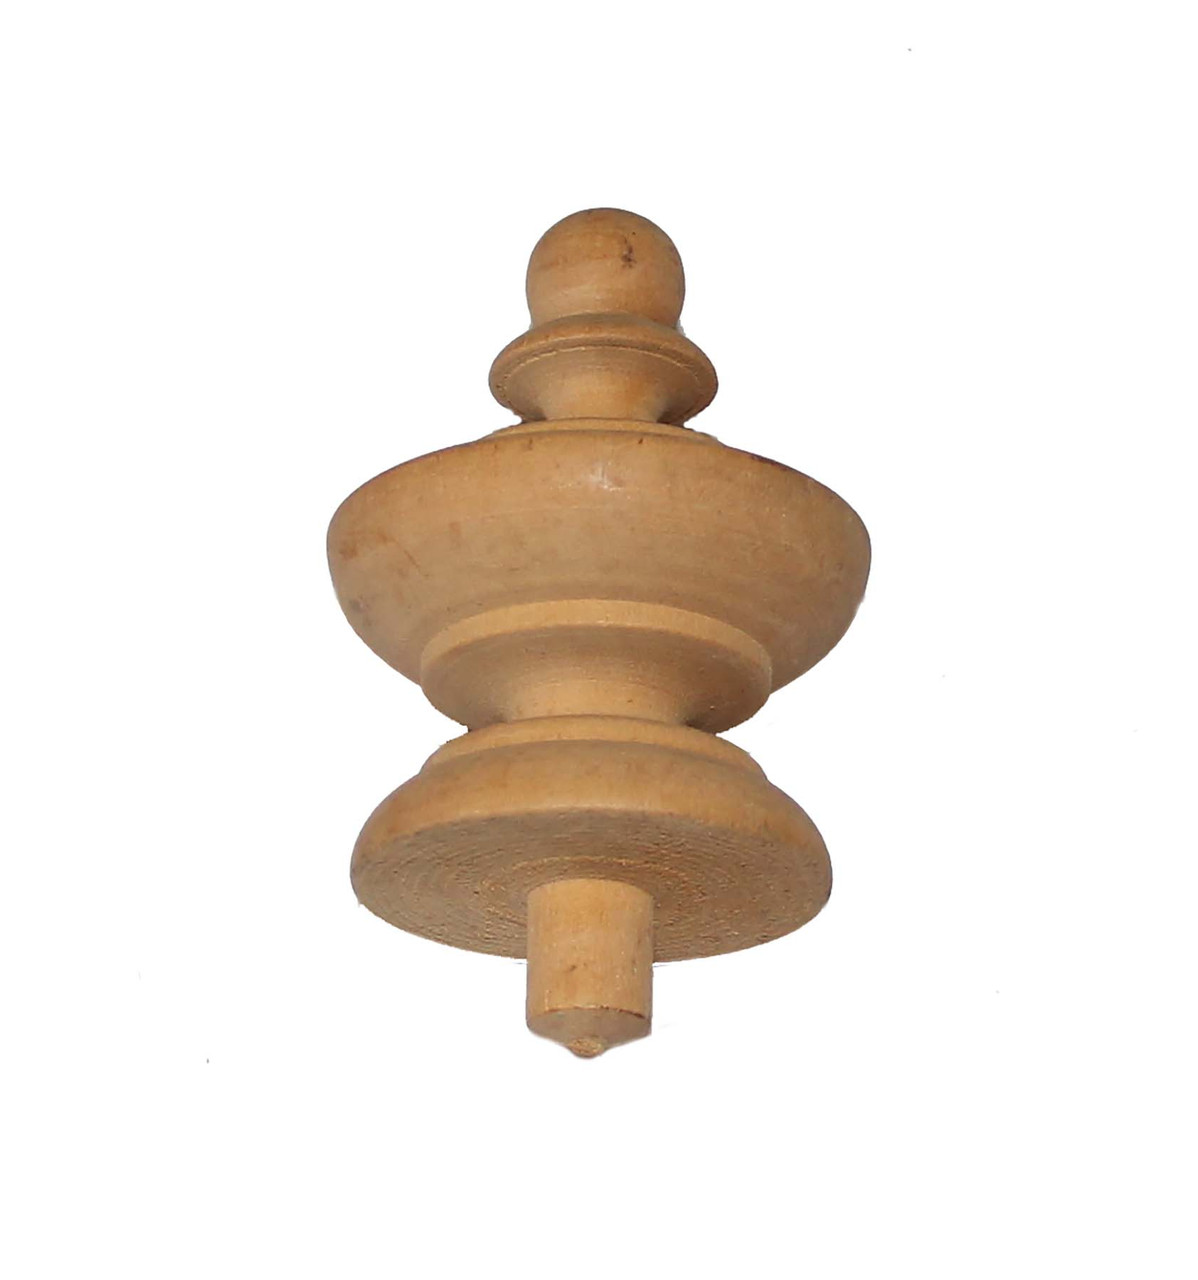 FINIAL WOOD UNFINISHED FRUIT 2 3/4"L WIDE